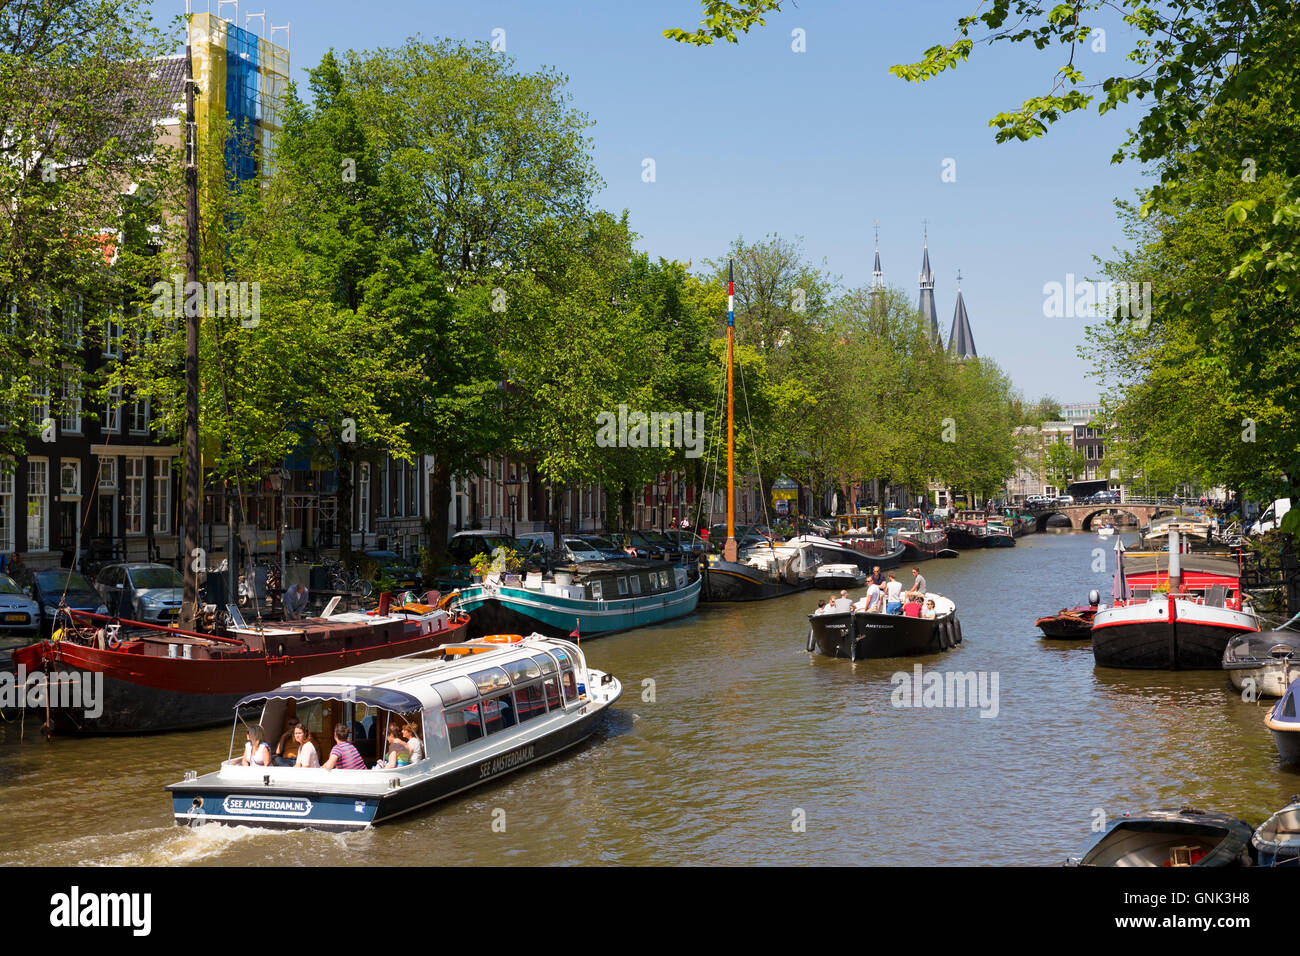 Tourist boat on sightseeing cruise tour along the canal district in the Jordaan area of Amsterdam, The Netherlands Stock Photo